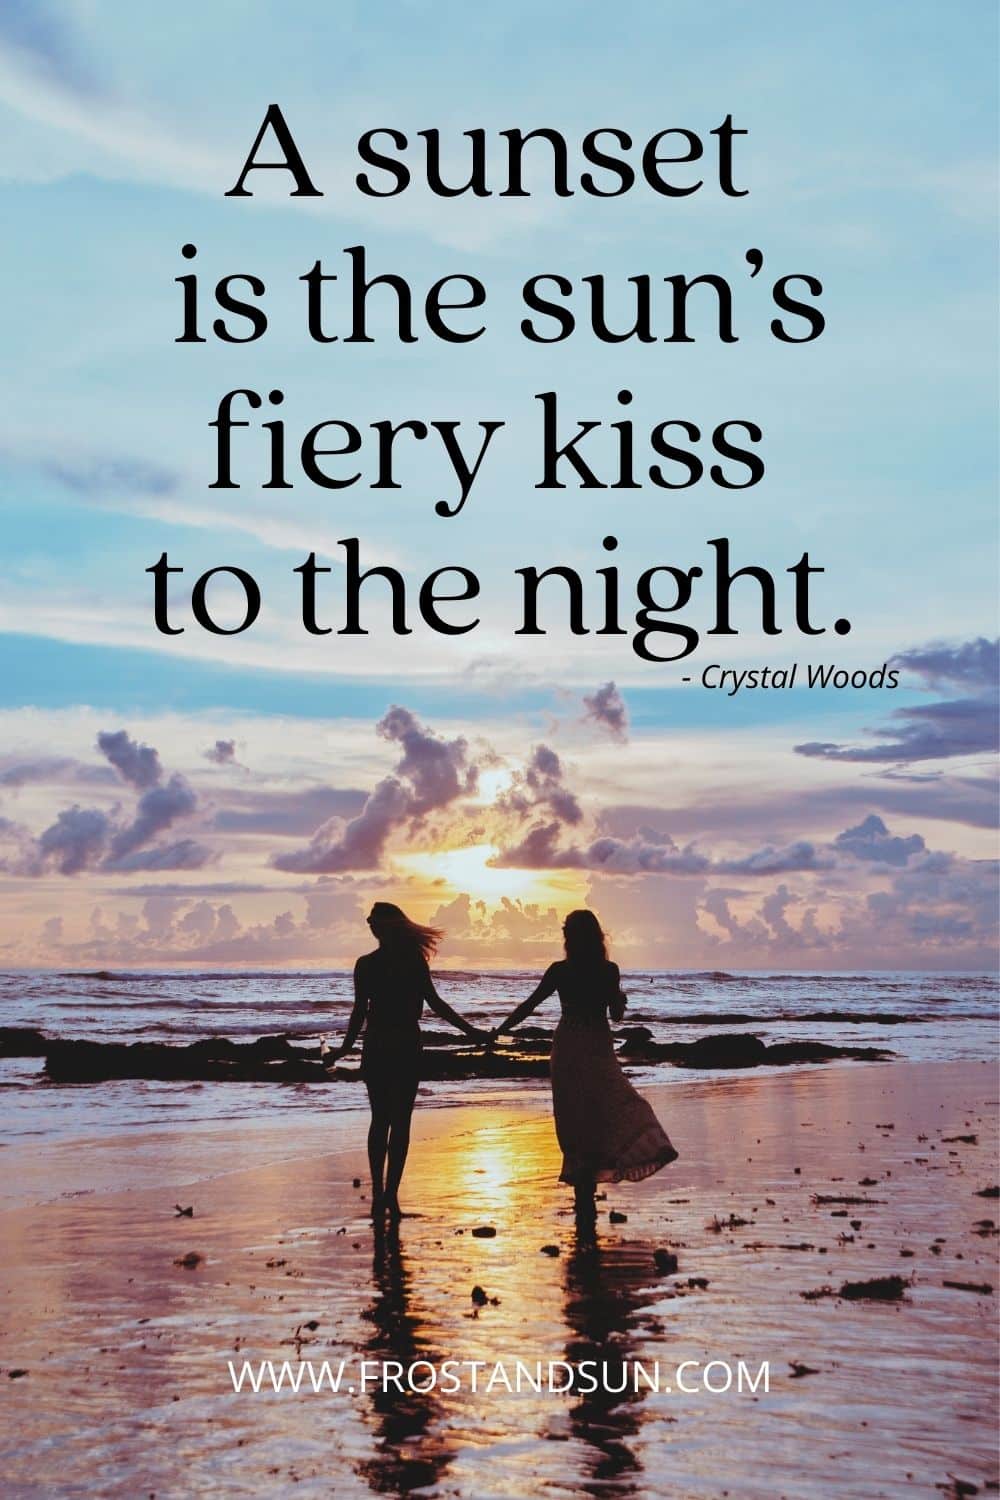 Photo of a couple holding hands while walking along the beach. Text above them reads "A sunset is the sun's fiery kiss to the night."